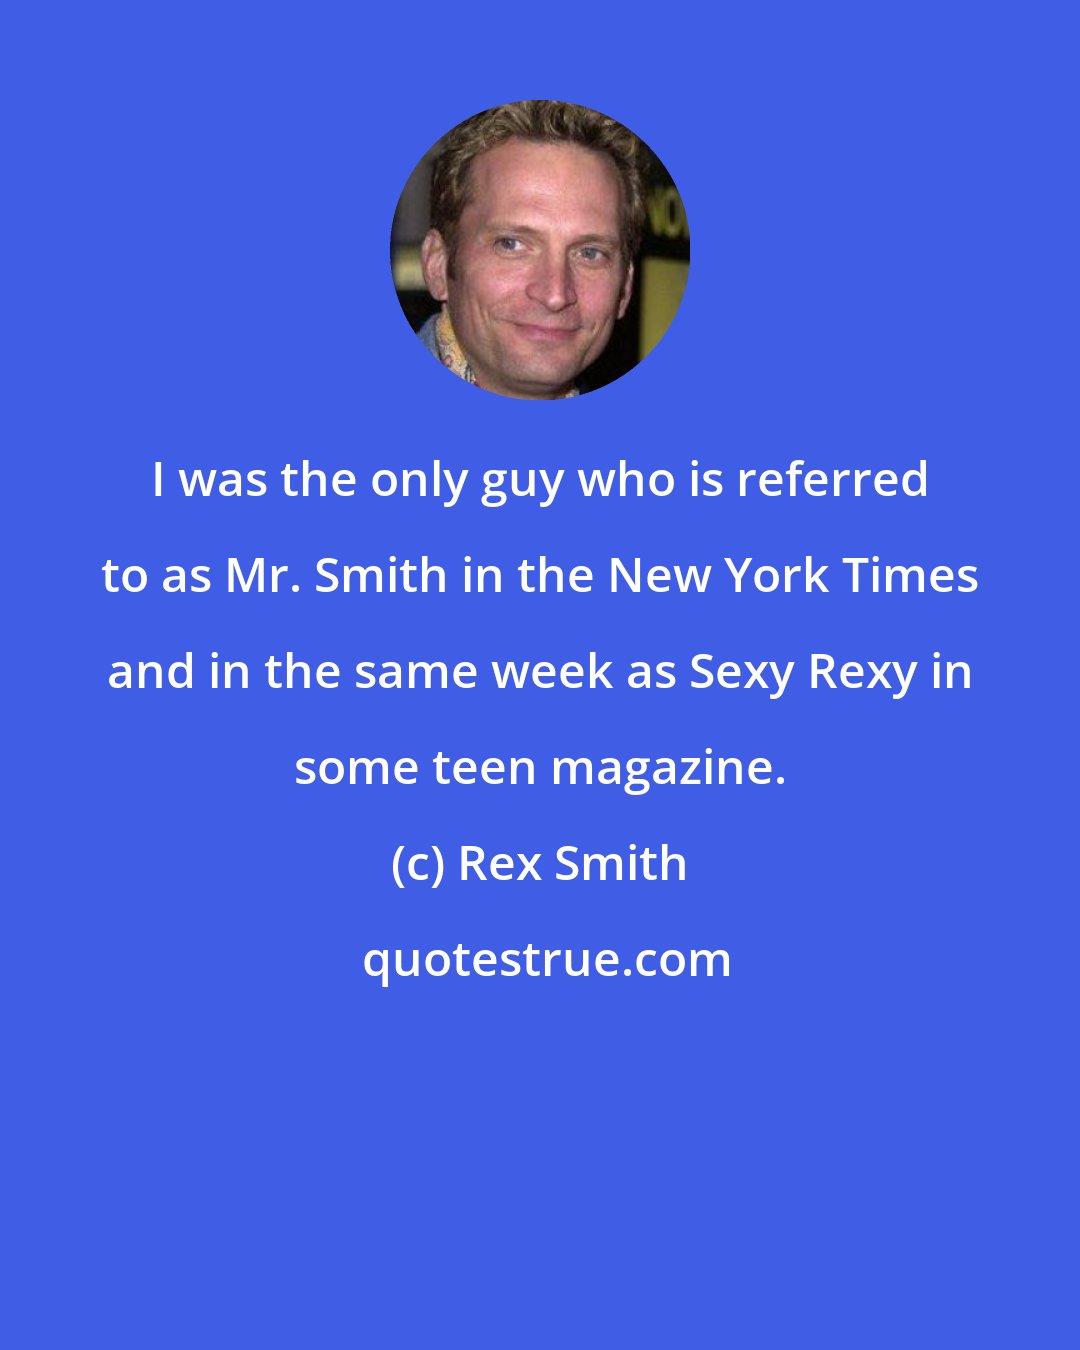 Rex Smith: I was the only guy who is referred to as Mr. Smith in the New York Times and in the same week as Sexy Rexy in some teen magazine.